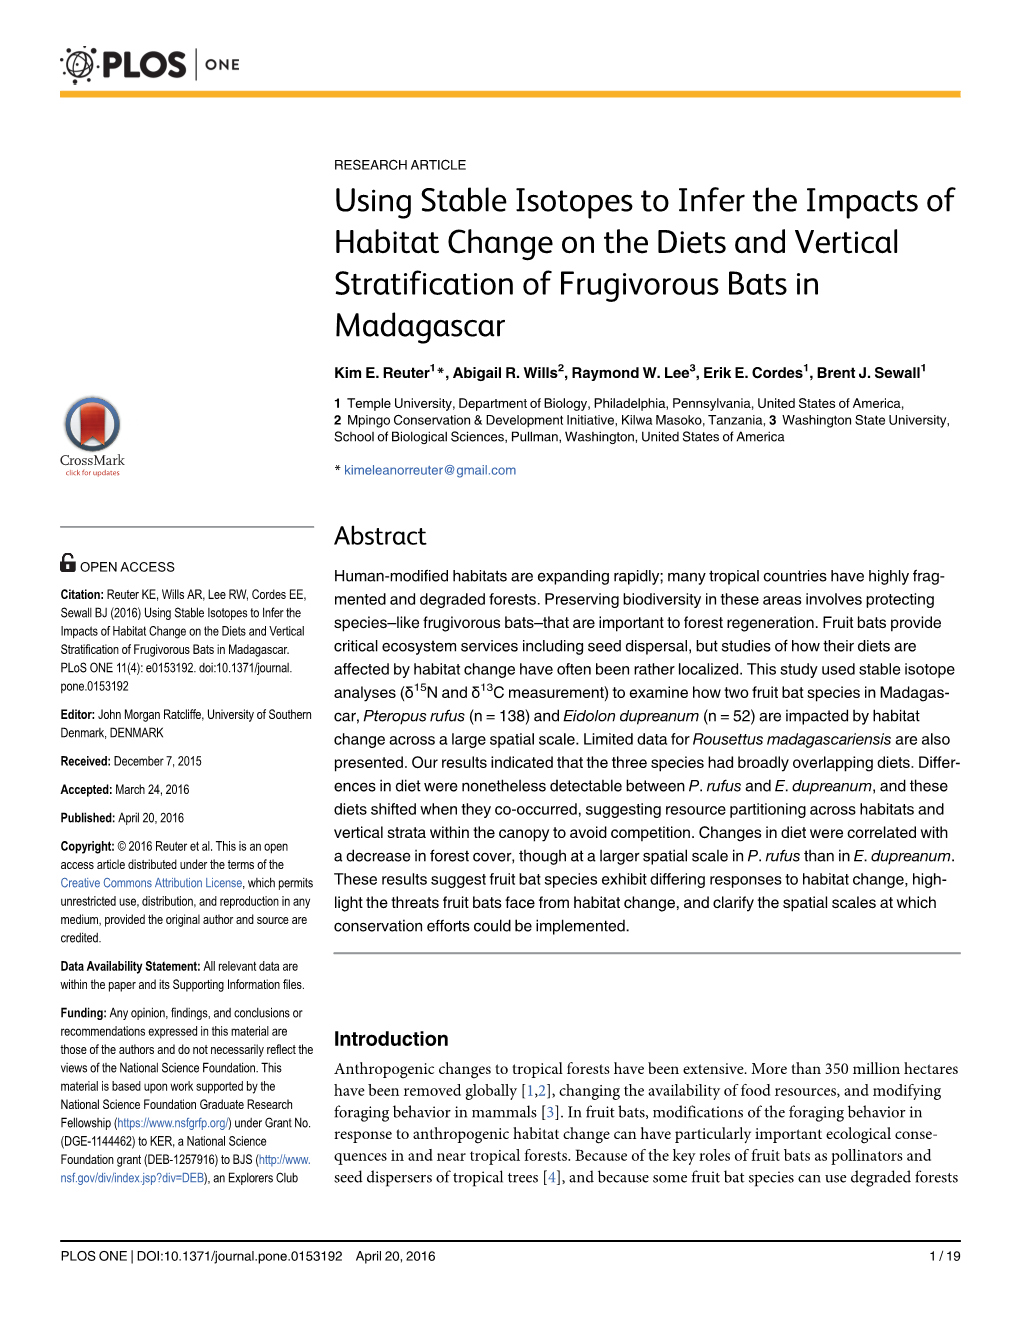 Using Stable Isotopes to Infer the Impacts of Habitat Change on the Diets and Vertical Stratification of Frugivorous Bats in Madagascar